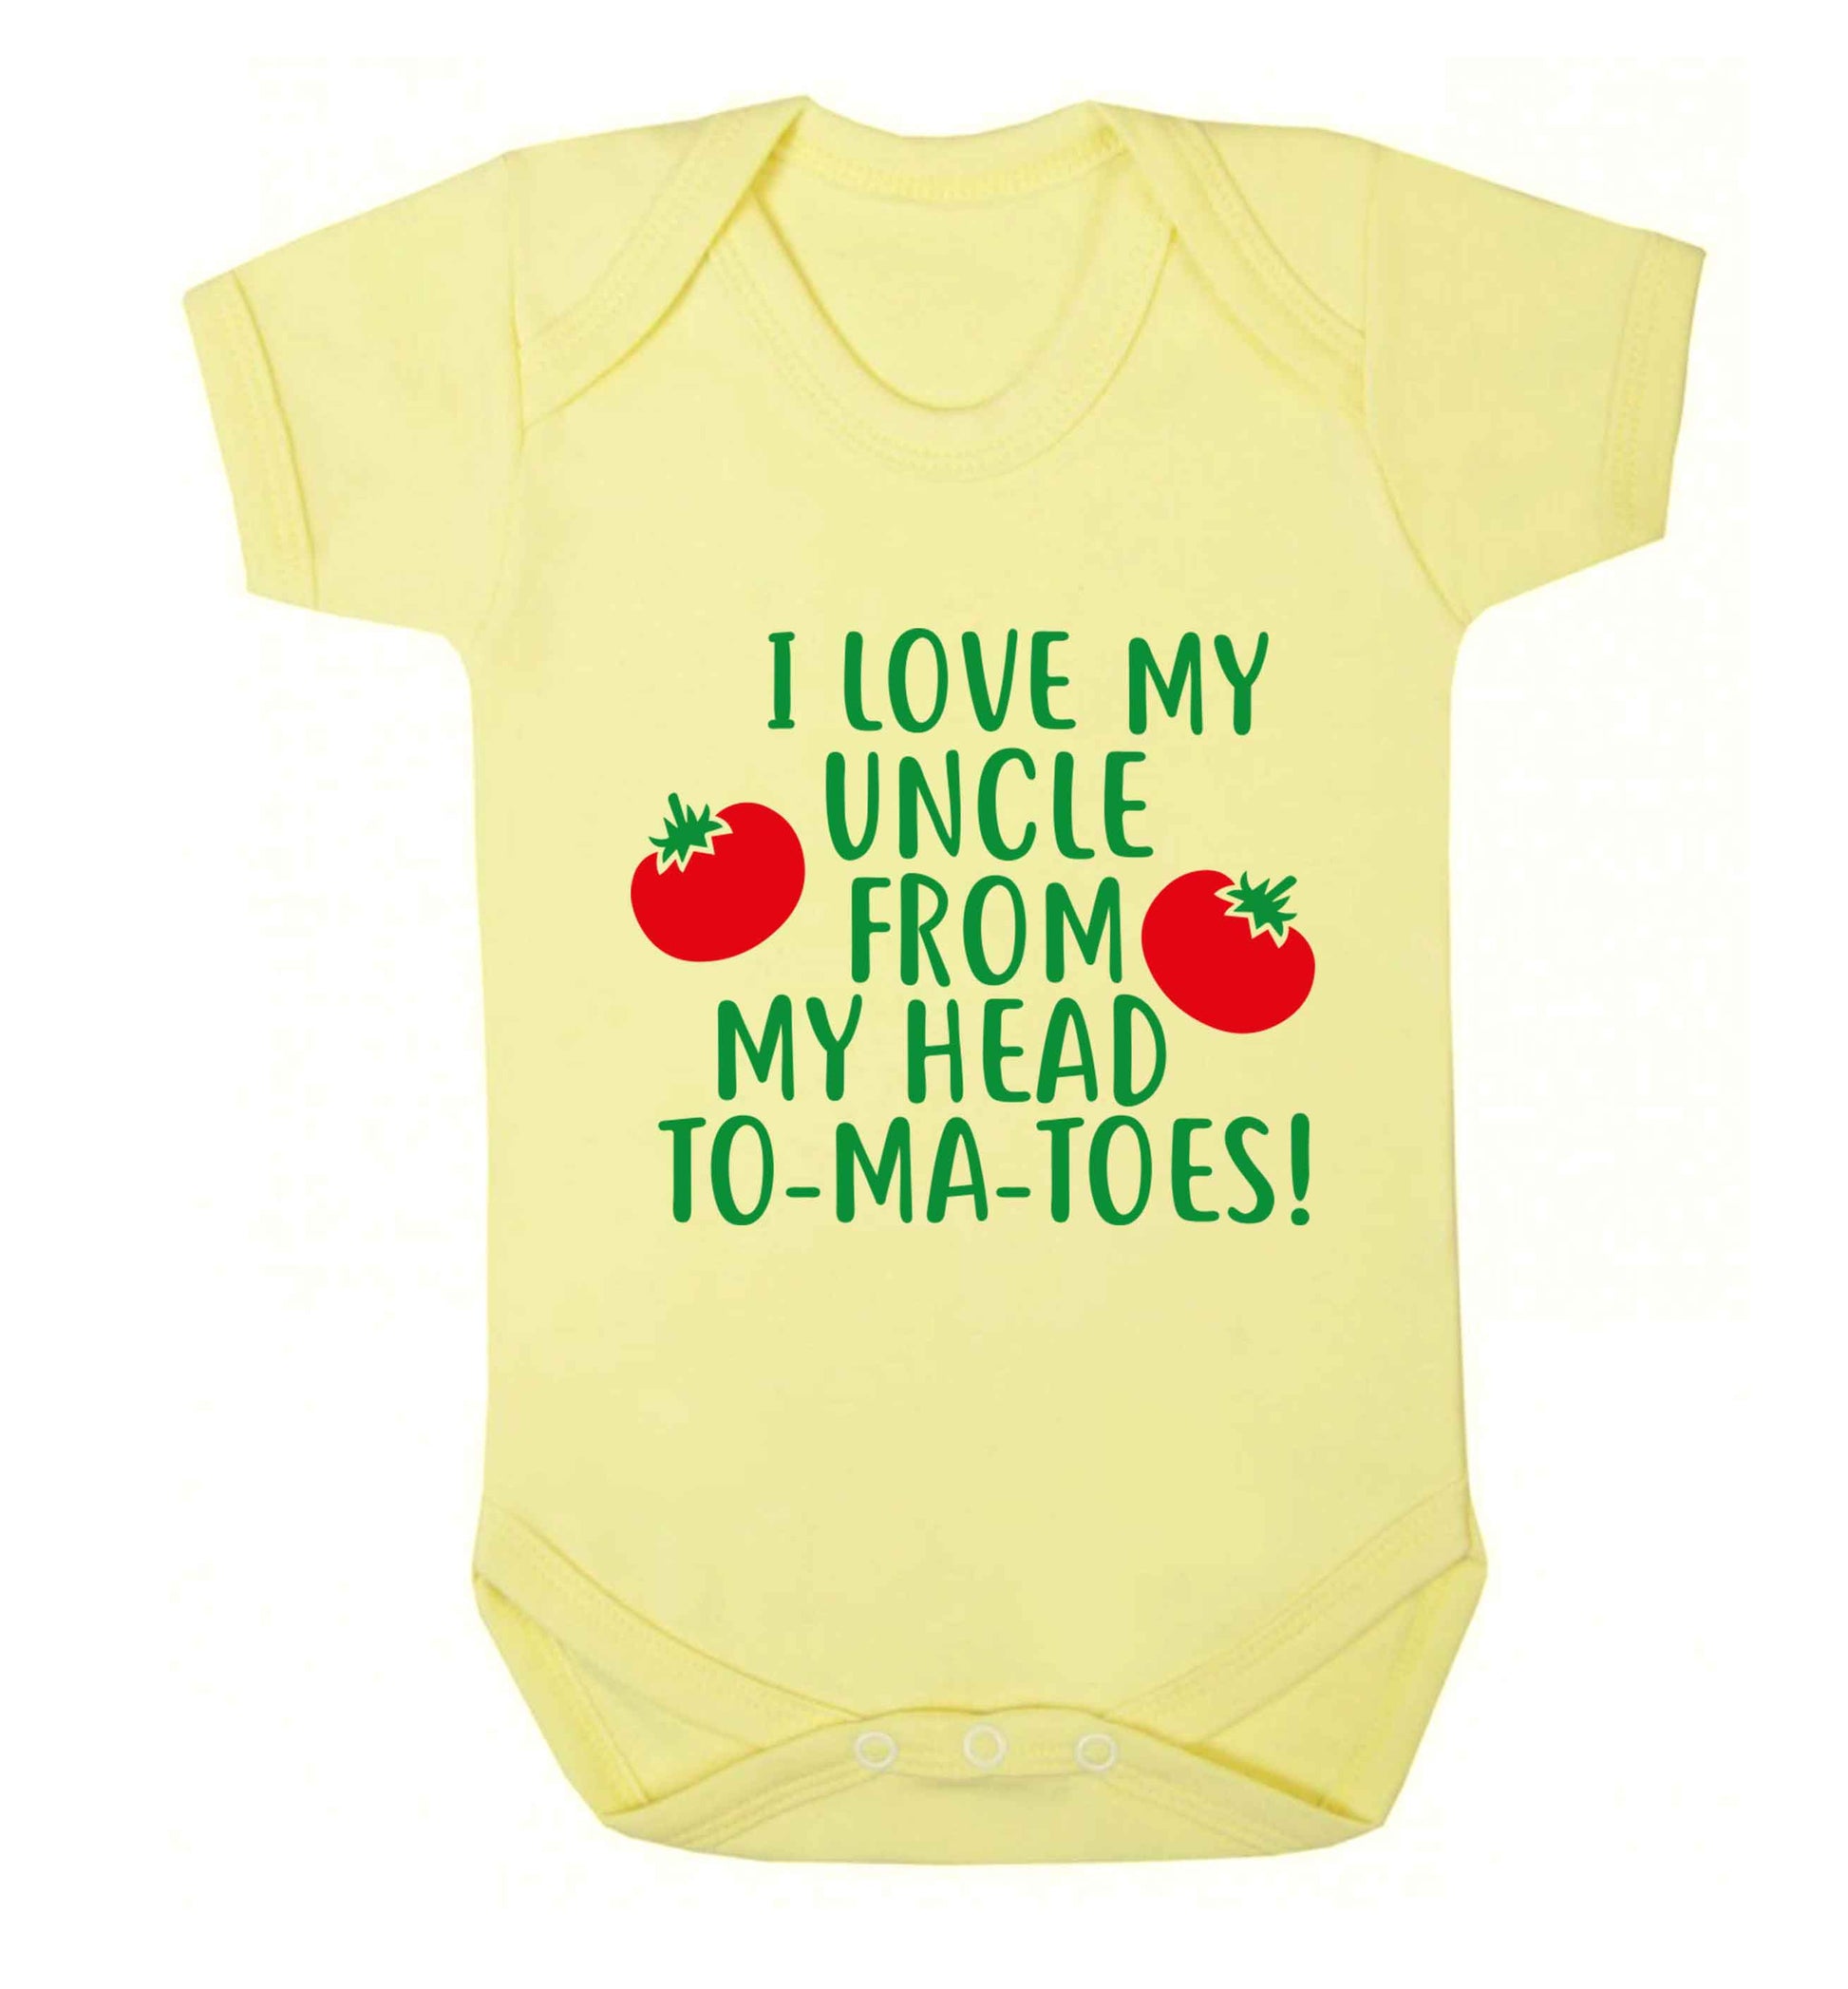 I love my uncle from my head To-Ma-Toes Baby Vest pale yellow 18-24 months